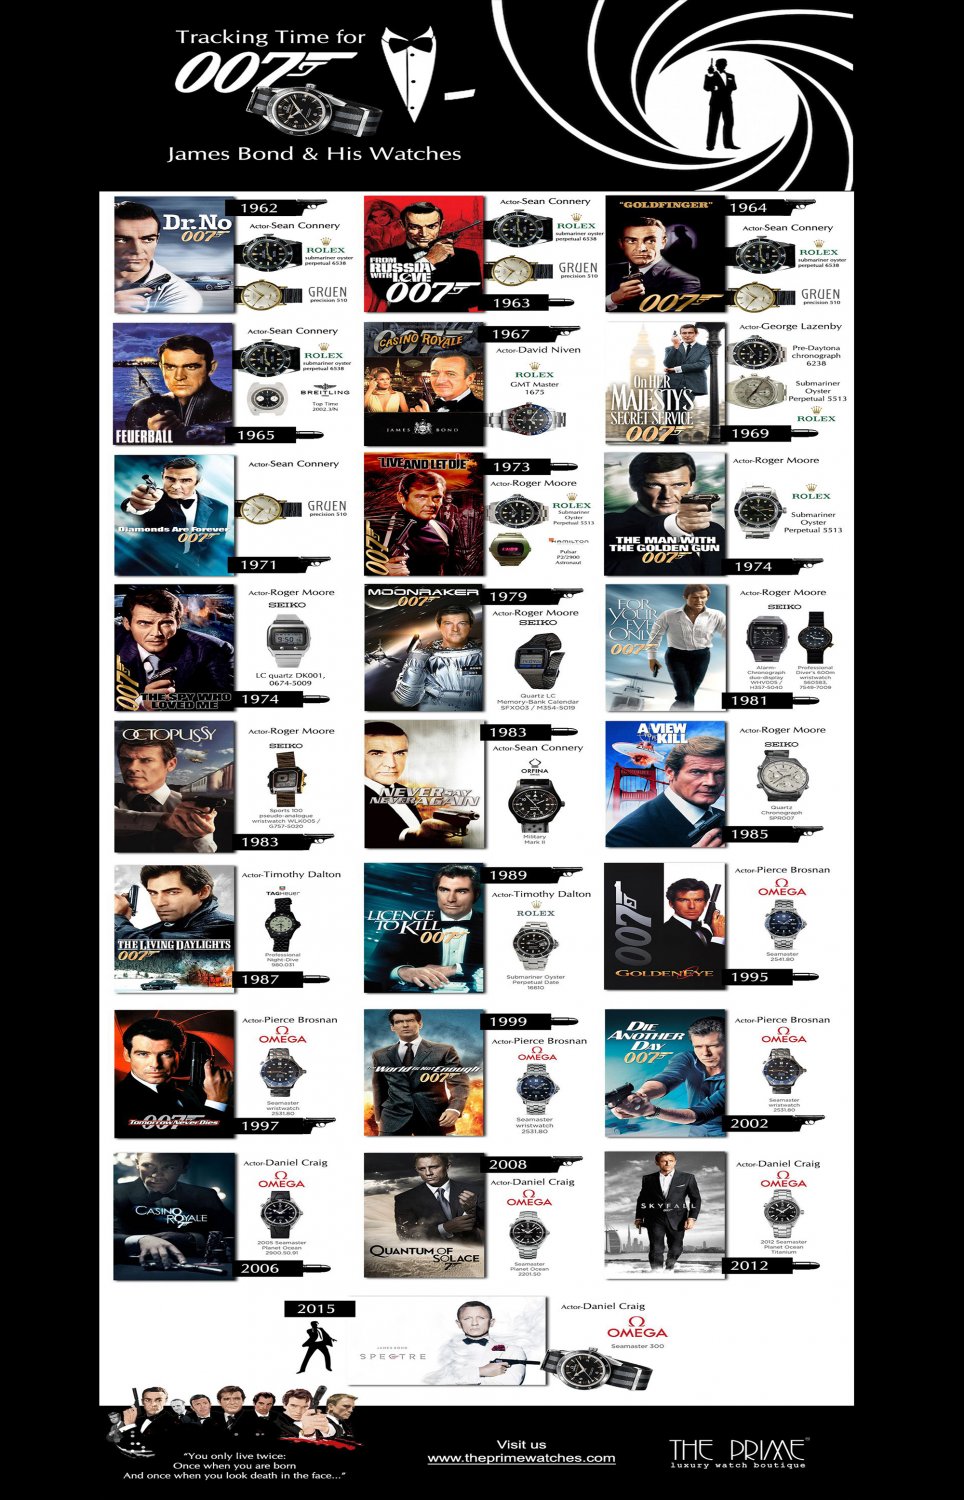 Tracking Time for 007 James Bond Watches Chart 13"x19" (32cm/49cm) Polyester Fabric Poster